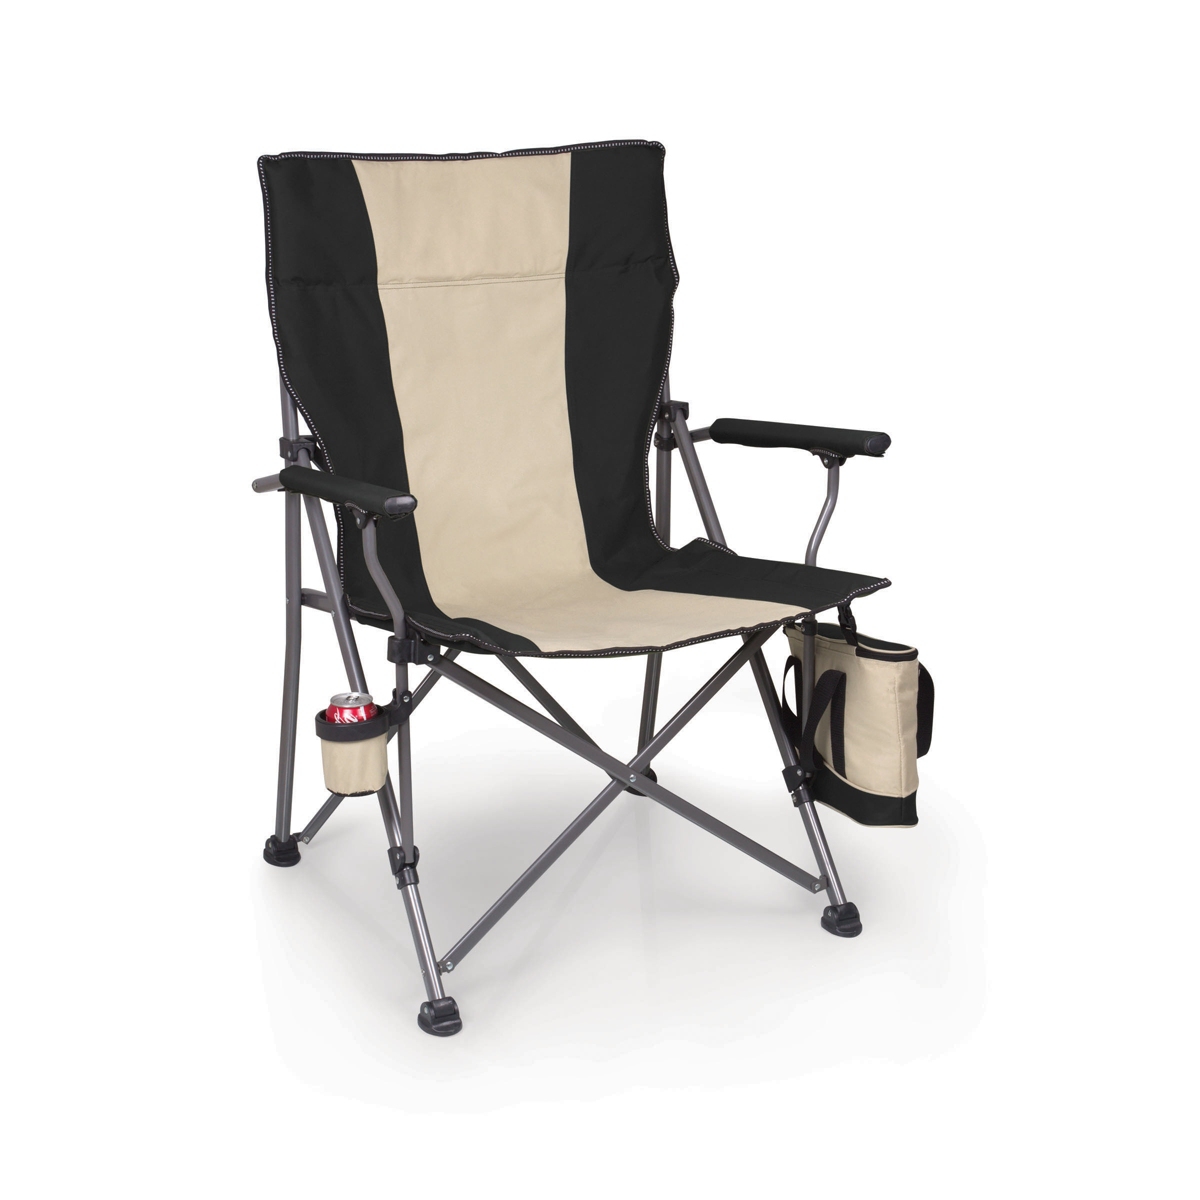 by Picnic Time Big Bear Xl Folding Camp Chair with Cooler - Black